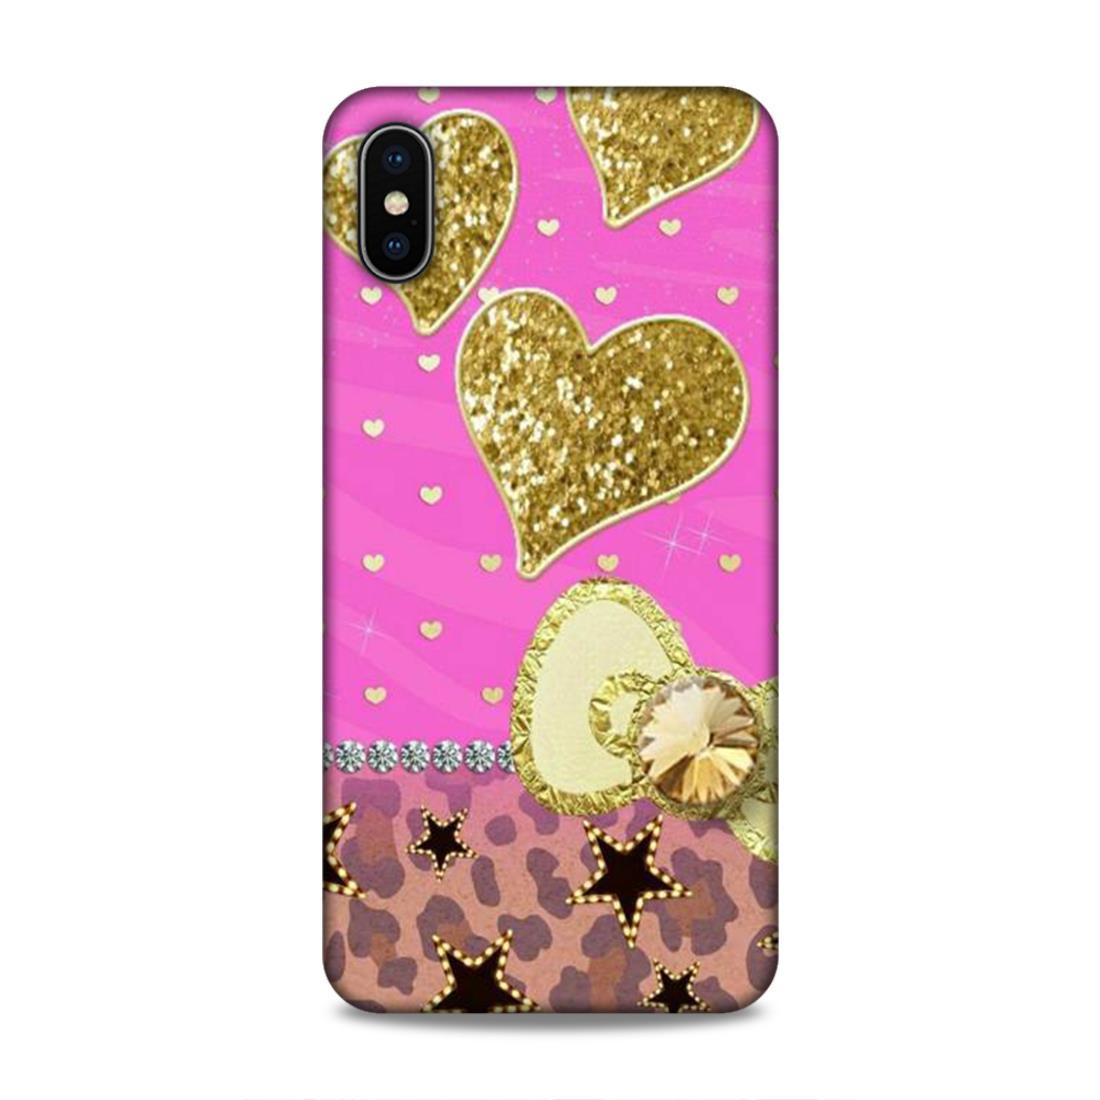 Cute Pink Heart iPhone XS Max Phone Case Cover